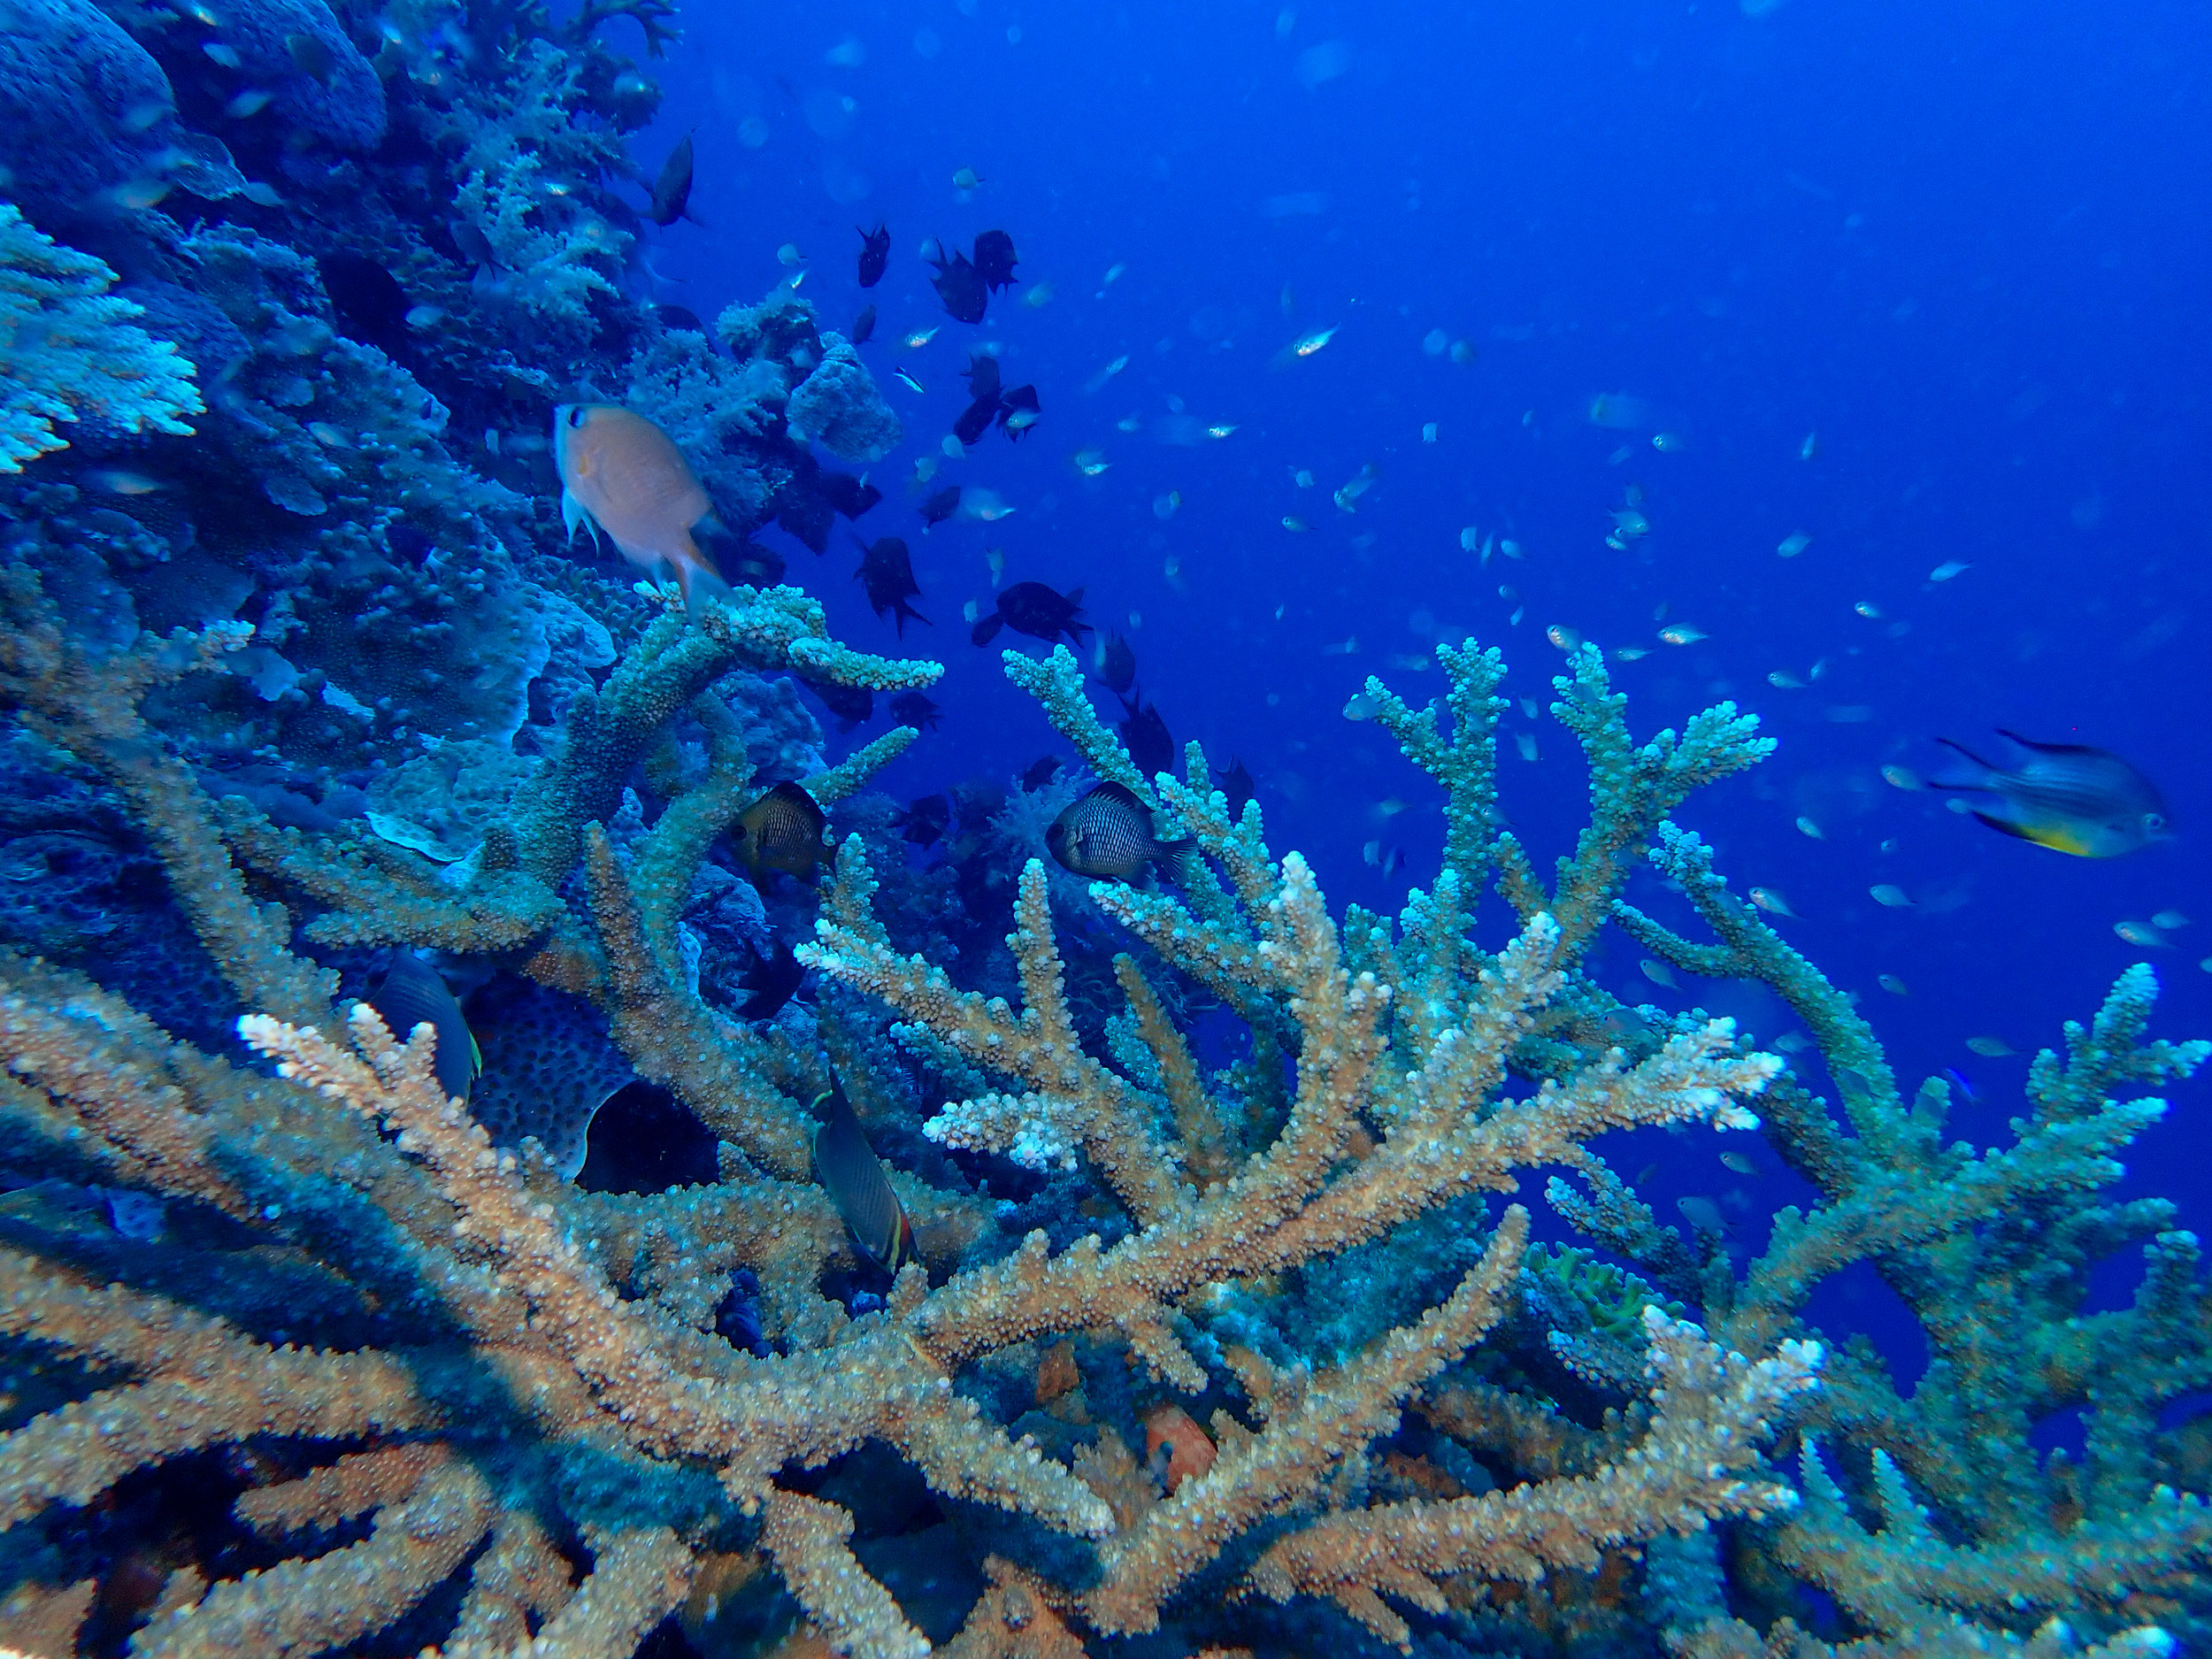 Staghorn coral - Acropora cervicornis, Dicky's Reef, Witu Islands